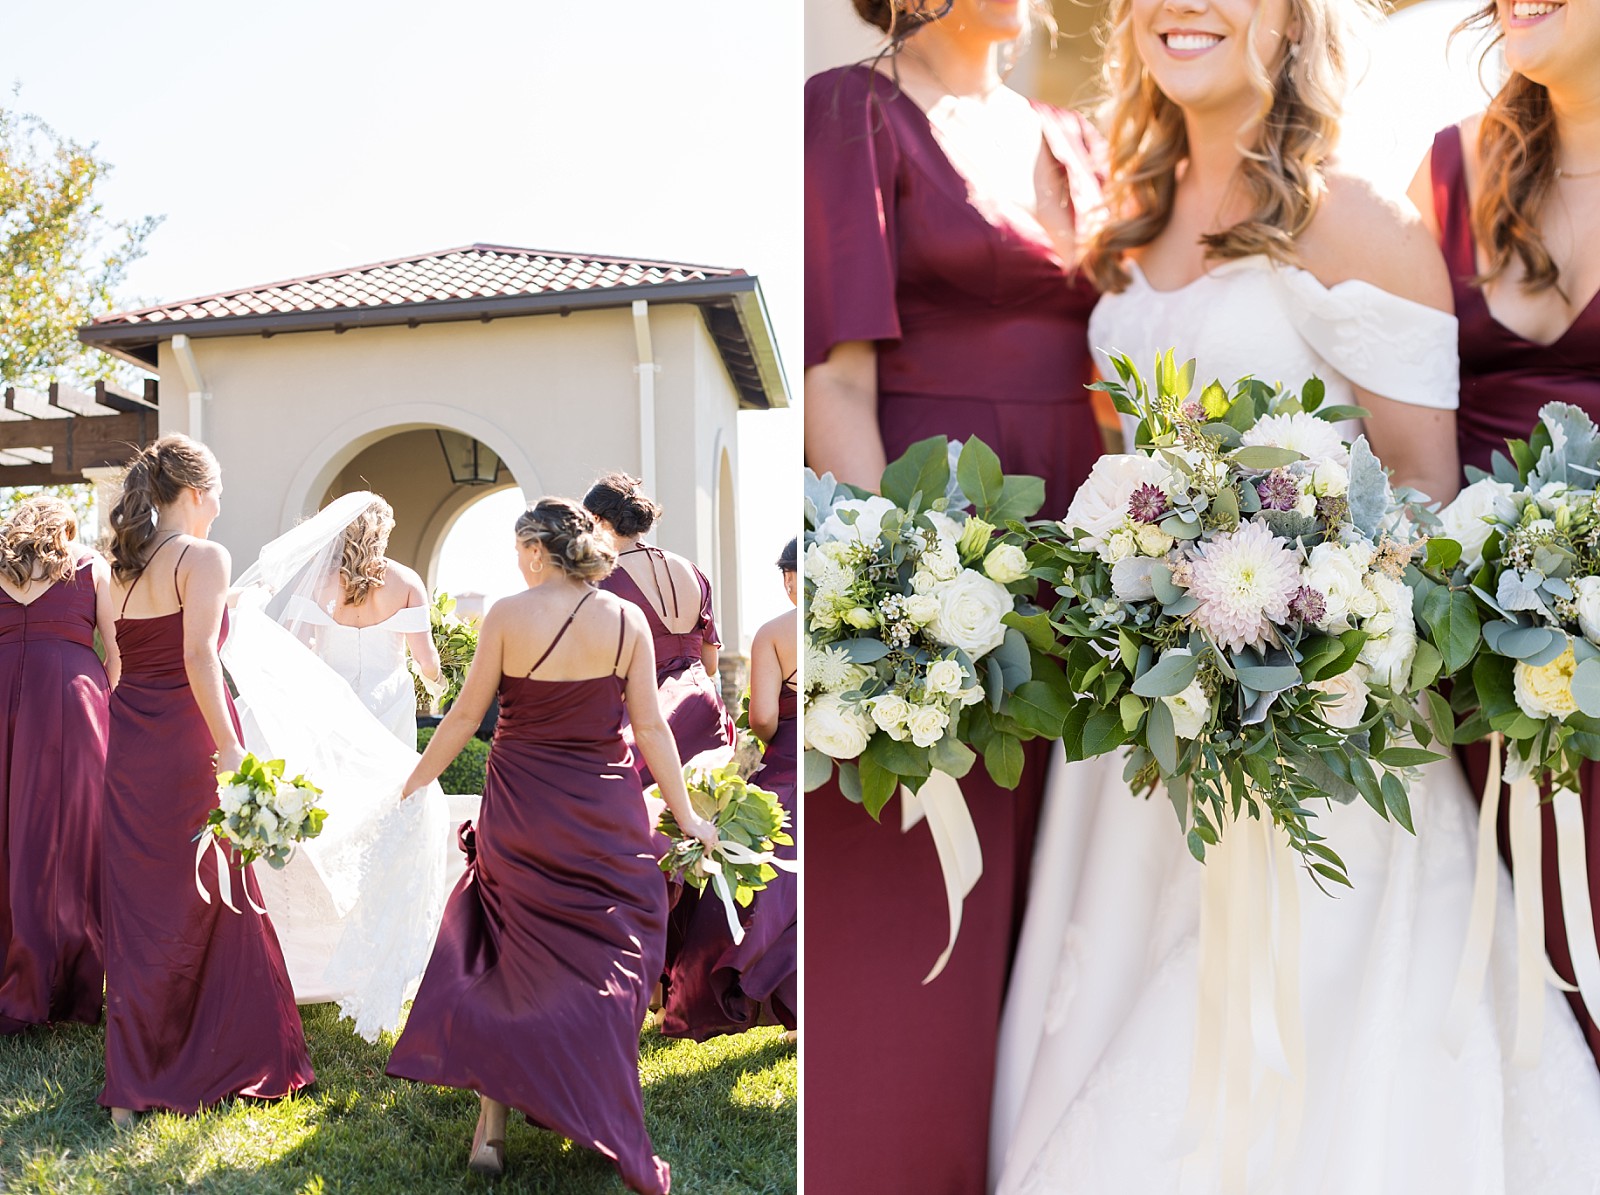 Bridal party walking and details of bridal bouquet | Childress Vineyards Wedding  | NC Wedding Photographer 